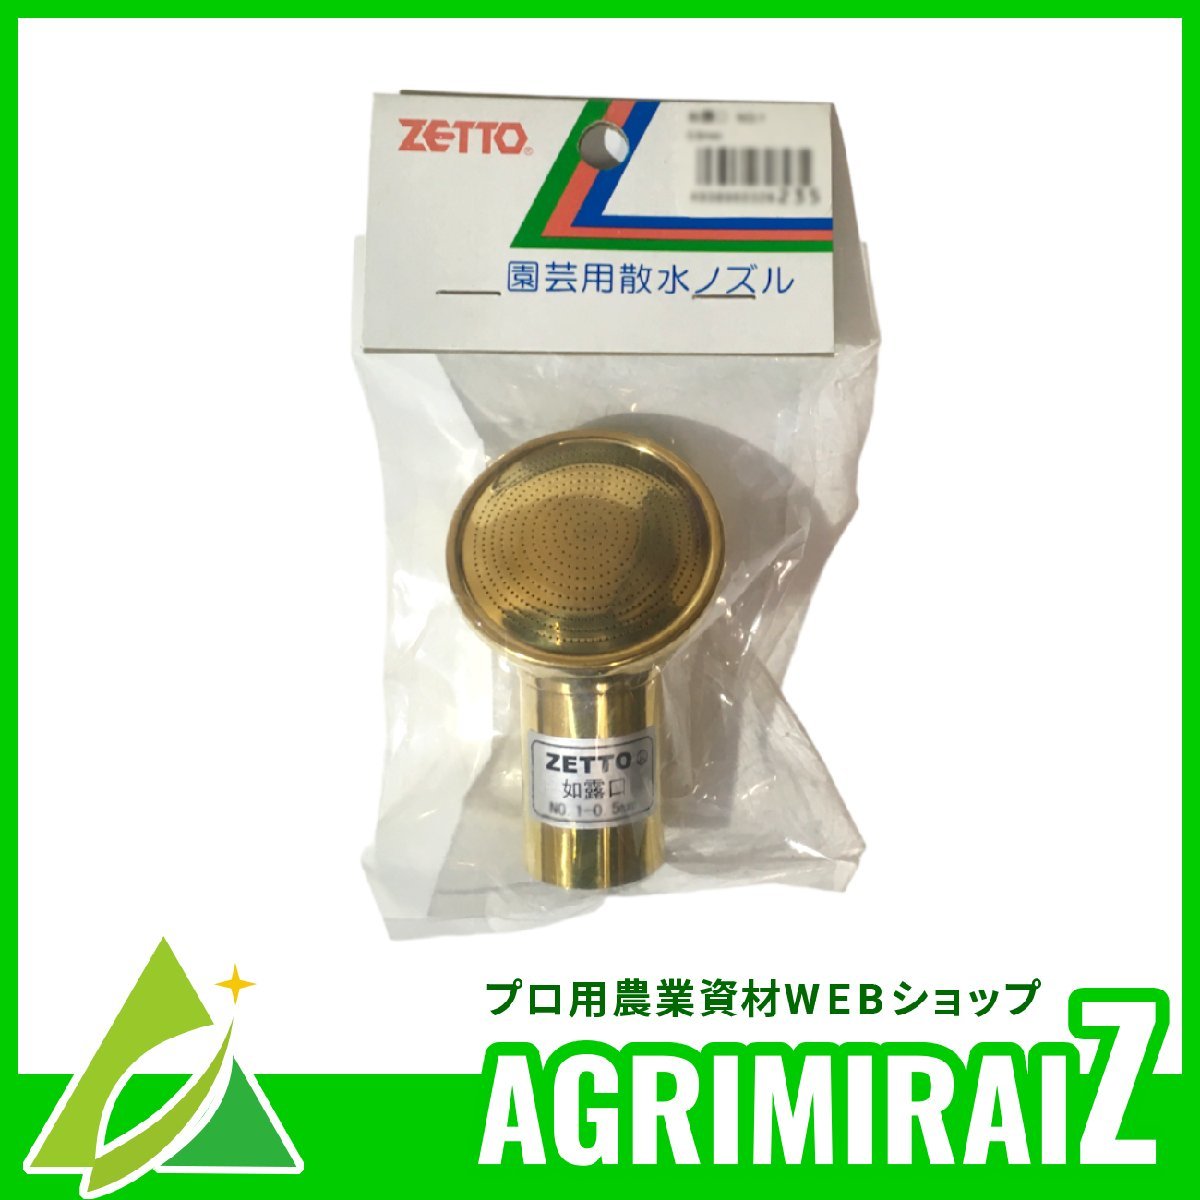  water sprinkling nozzle water space ZETTO gardening for water sprinkling nozzle ...No.5 hole diameter 0.9mm